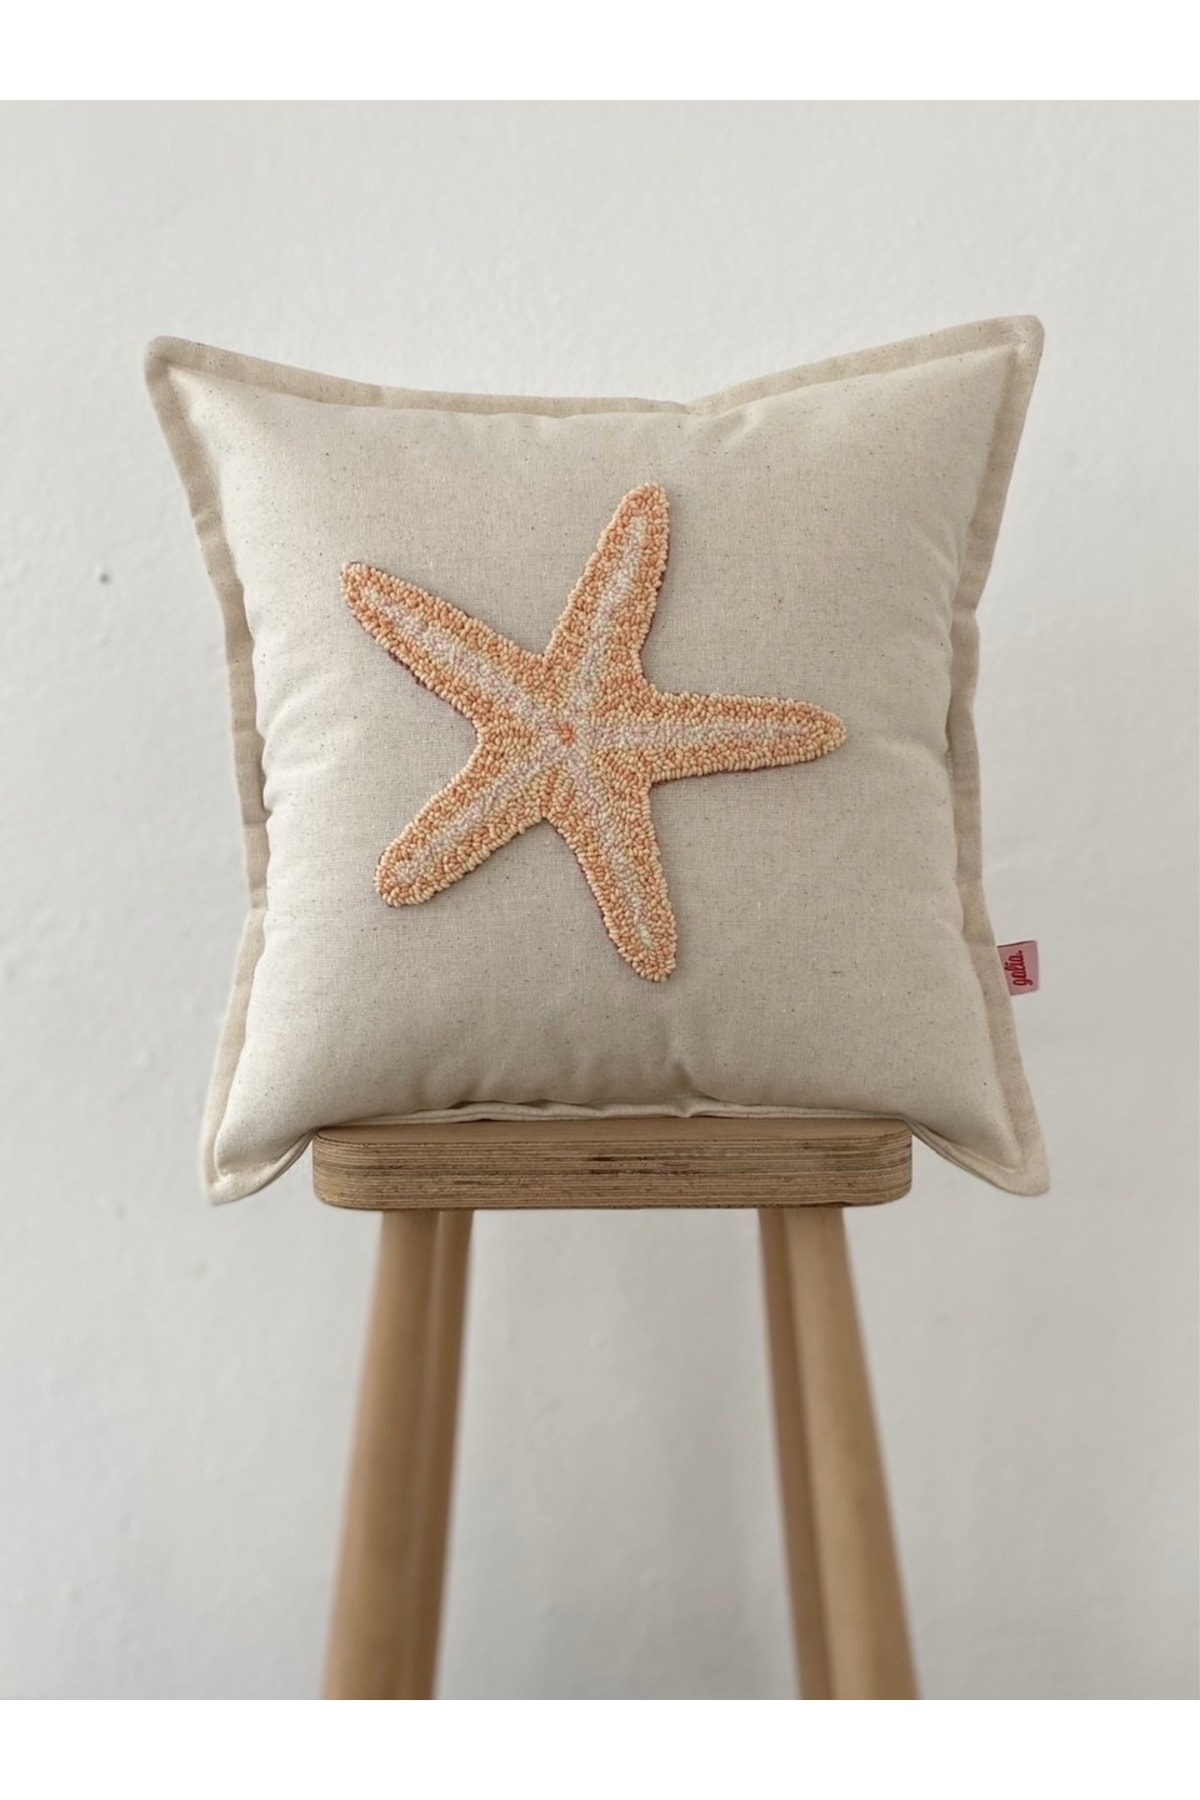 Marine Series Starfish Washed Linen Punch Cushion Pillow Cover